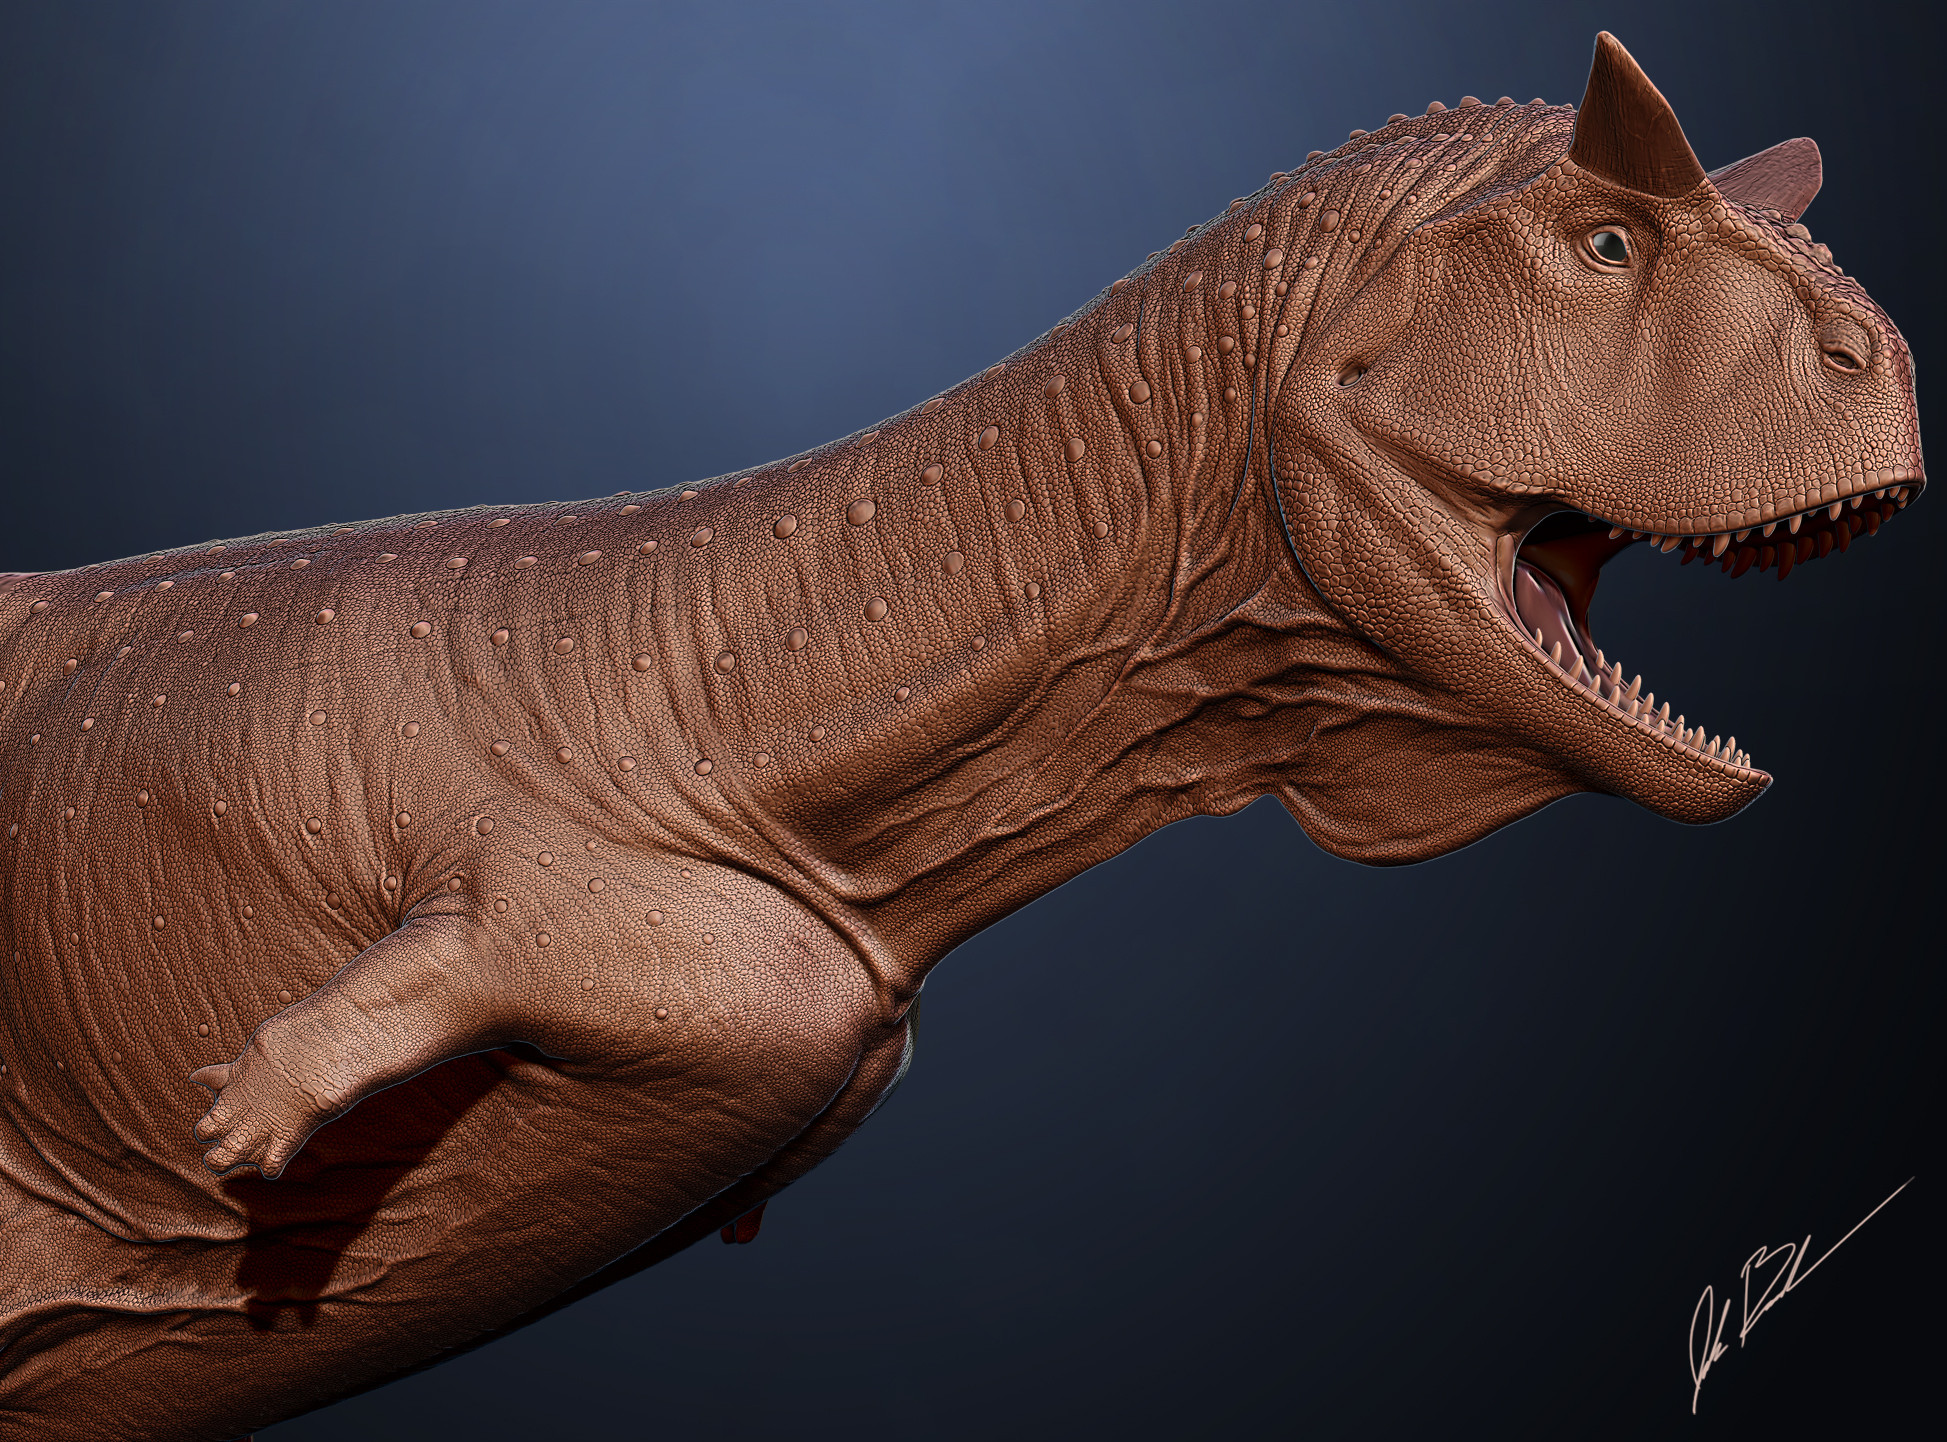 Early WIP image, sculpting in the scales for the body.